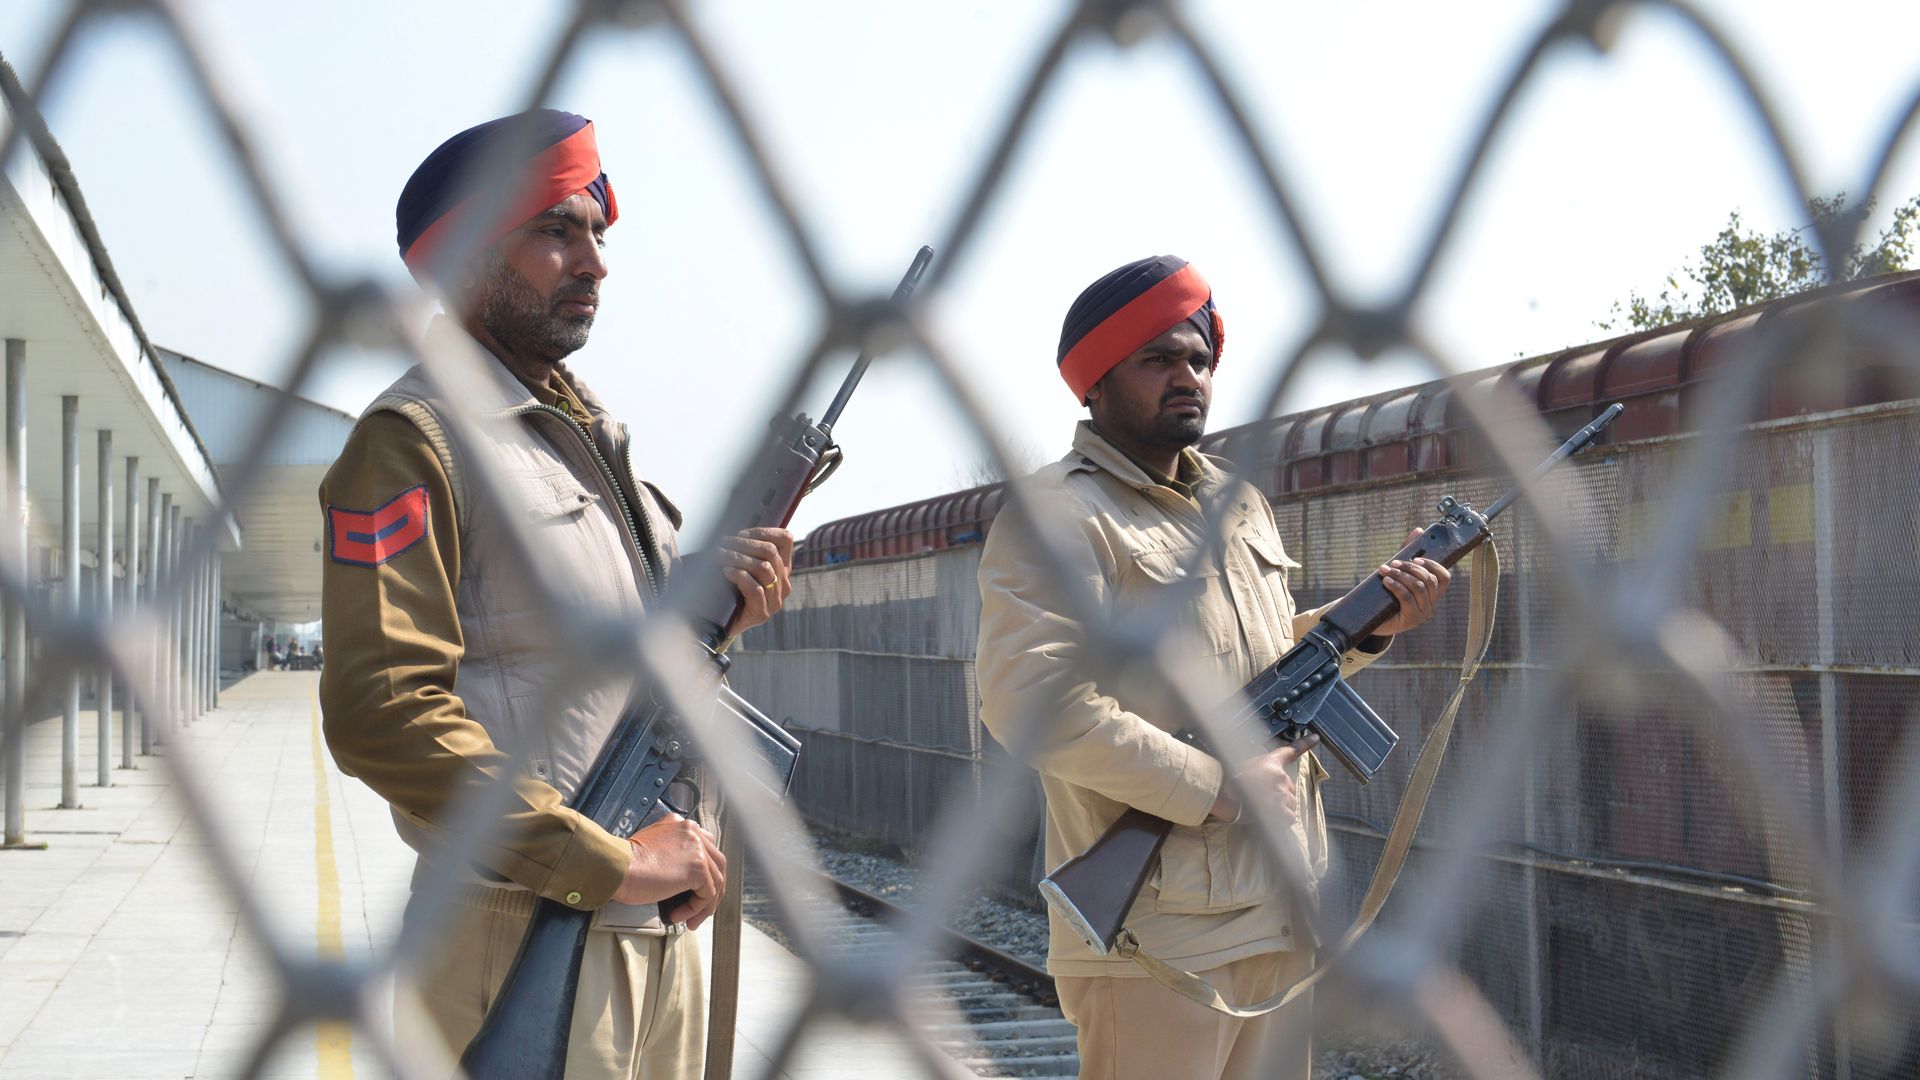 In this image, Indian Punjab Police stand guard with assault weapons behind a gated fence at a train station.